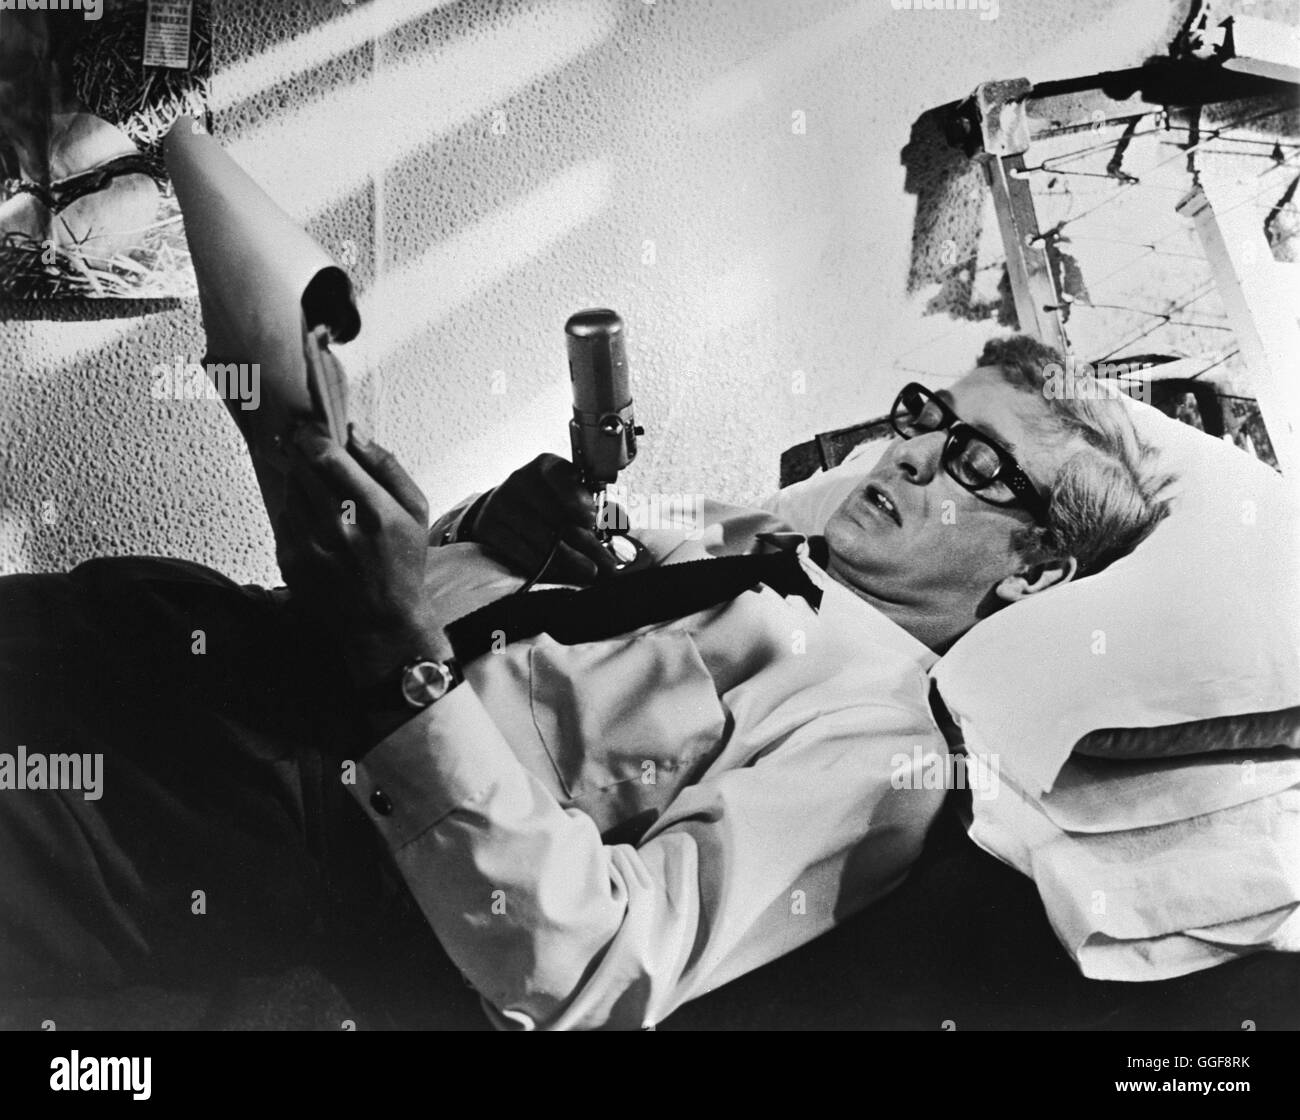 IPCRESS - STRENG GEHEIM / The Ipress File GB 1965 / Sidney J. Furie MICHAEL CAINE als Harry Palmer in 'Ipcress - streng geheim', 1965. Regie: Sidney J. Furie aka. The Ipress File Stock Photo